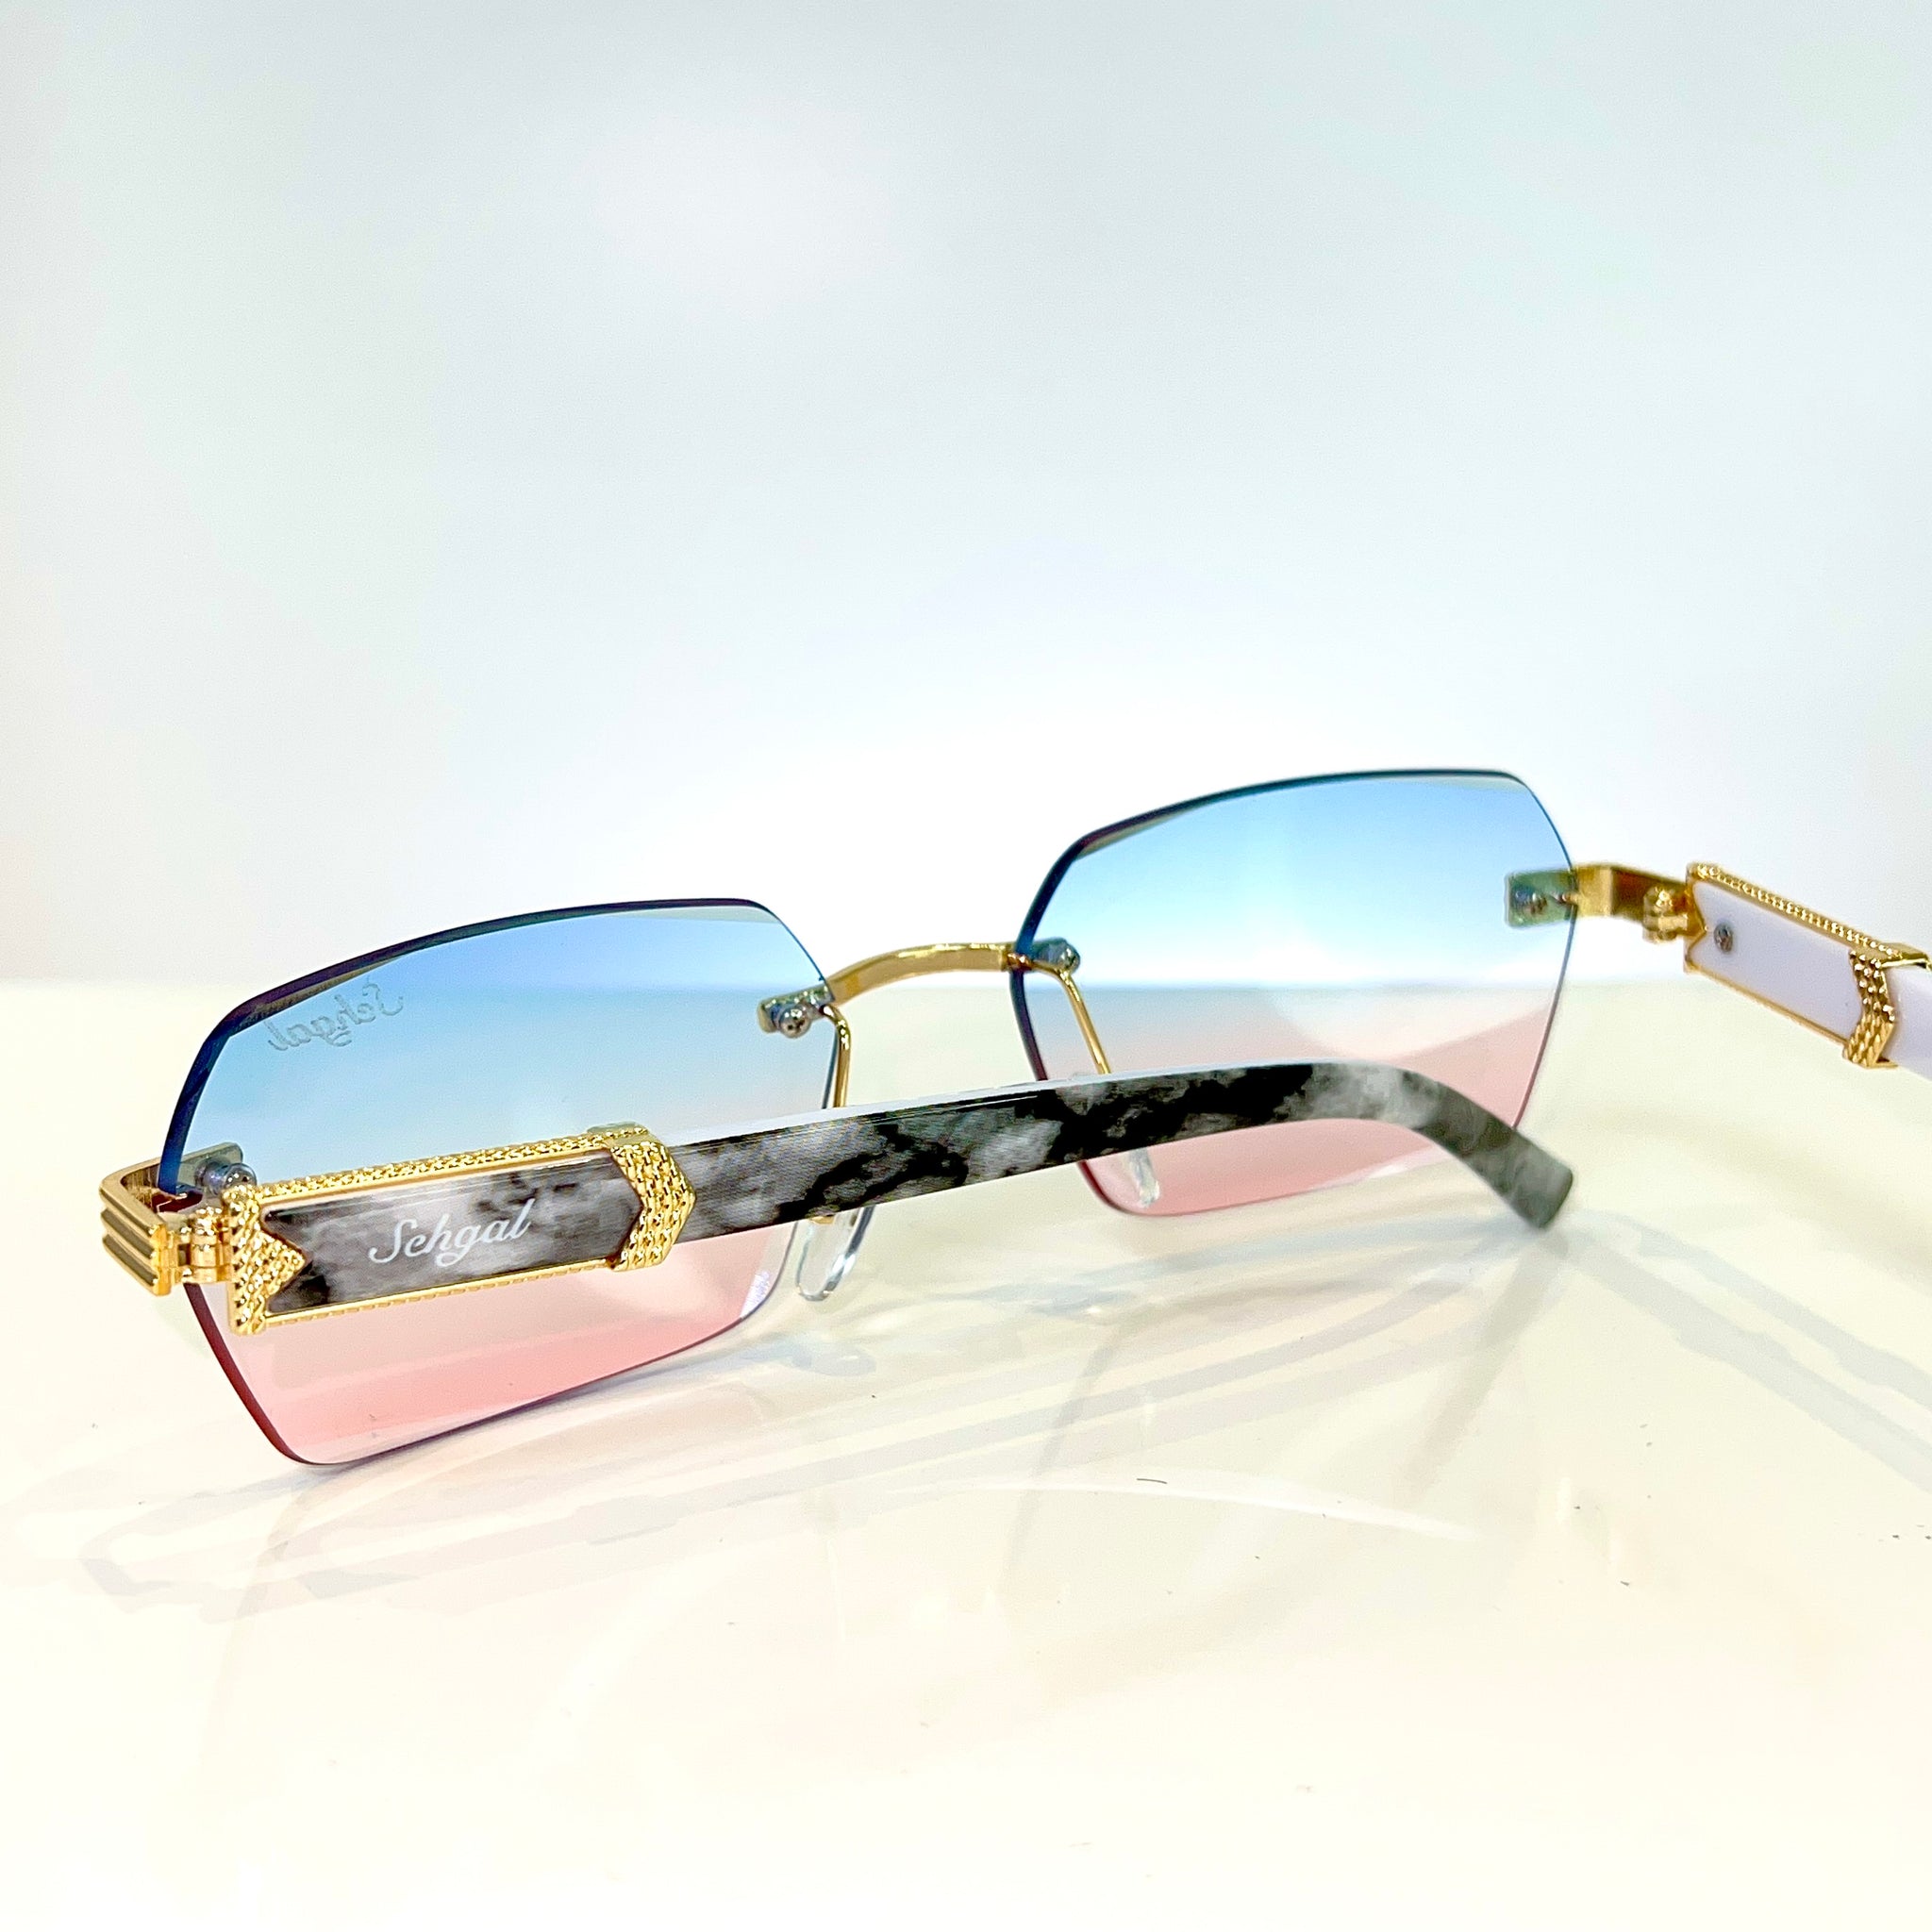 Marblecut Glasses - 14 carat gold plated -  Pink / Blue Shade